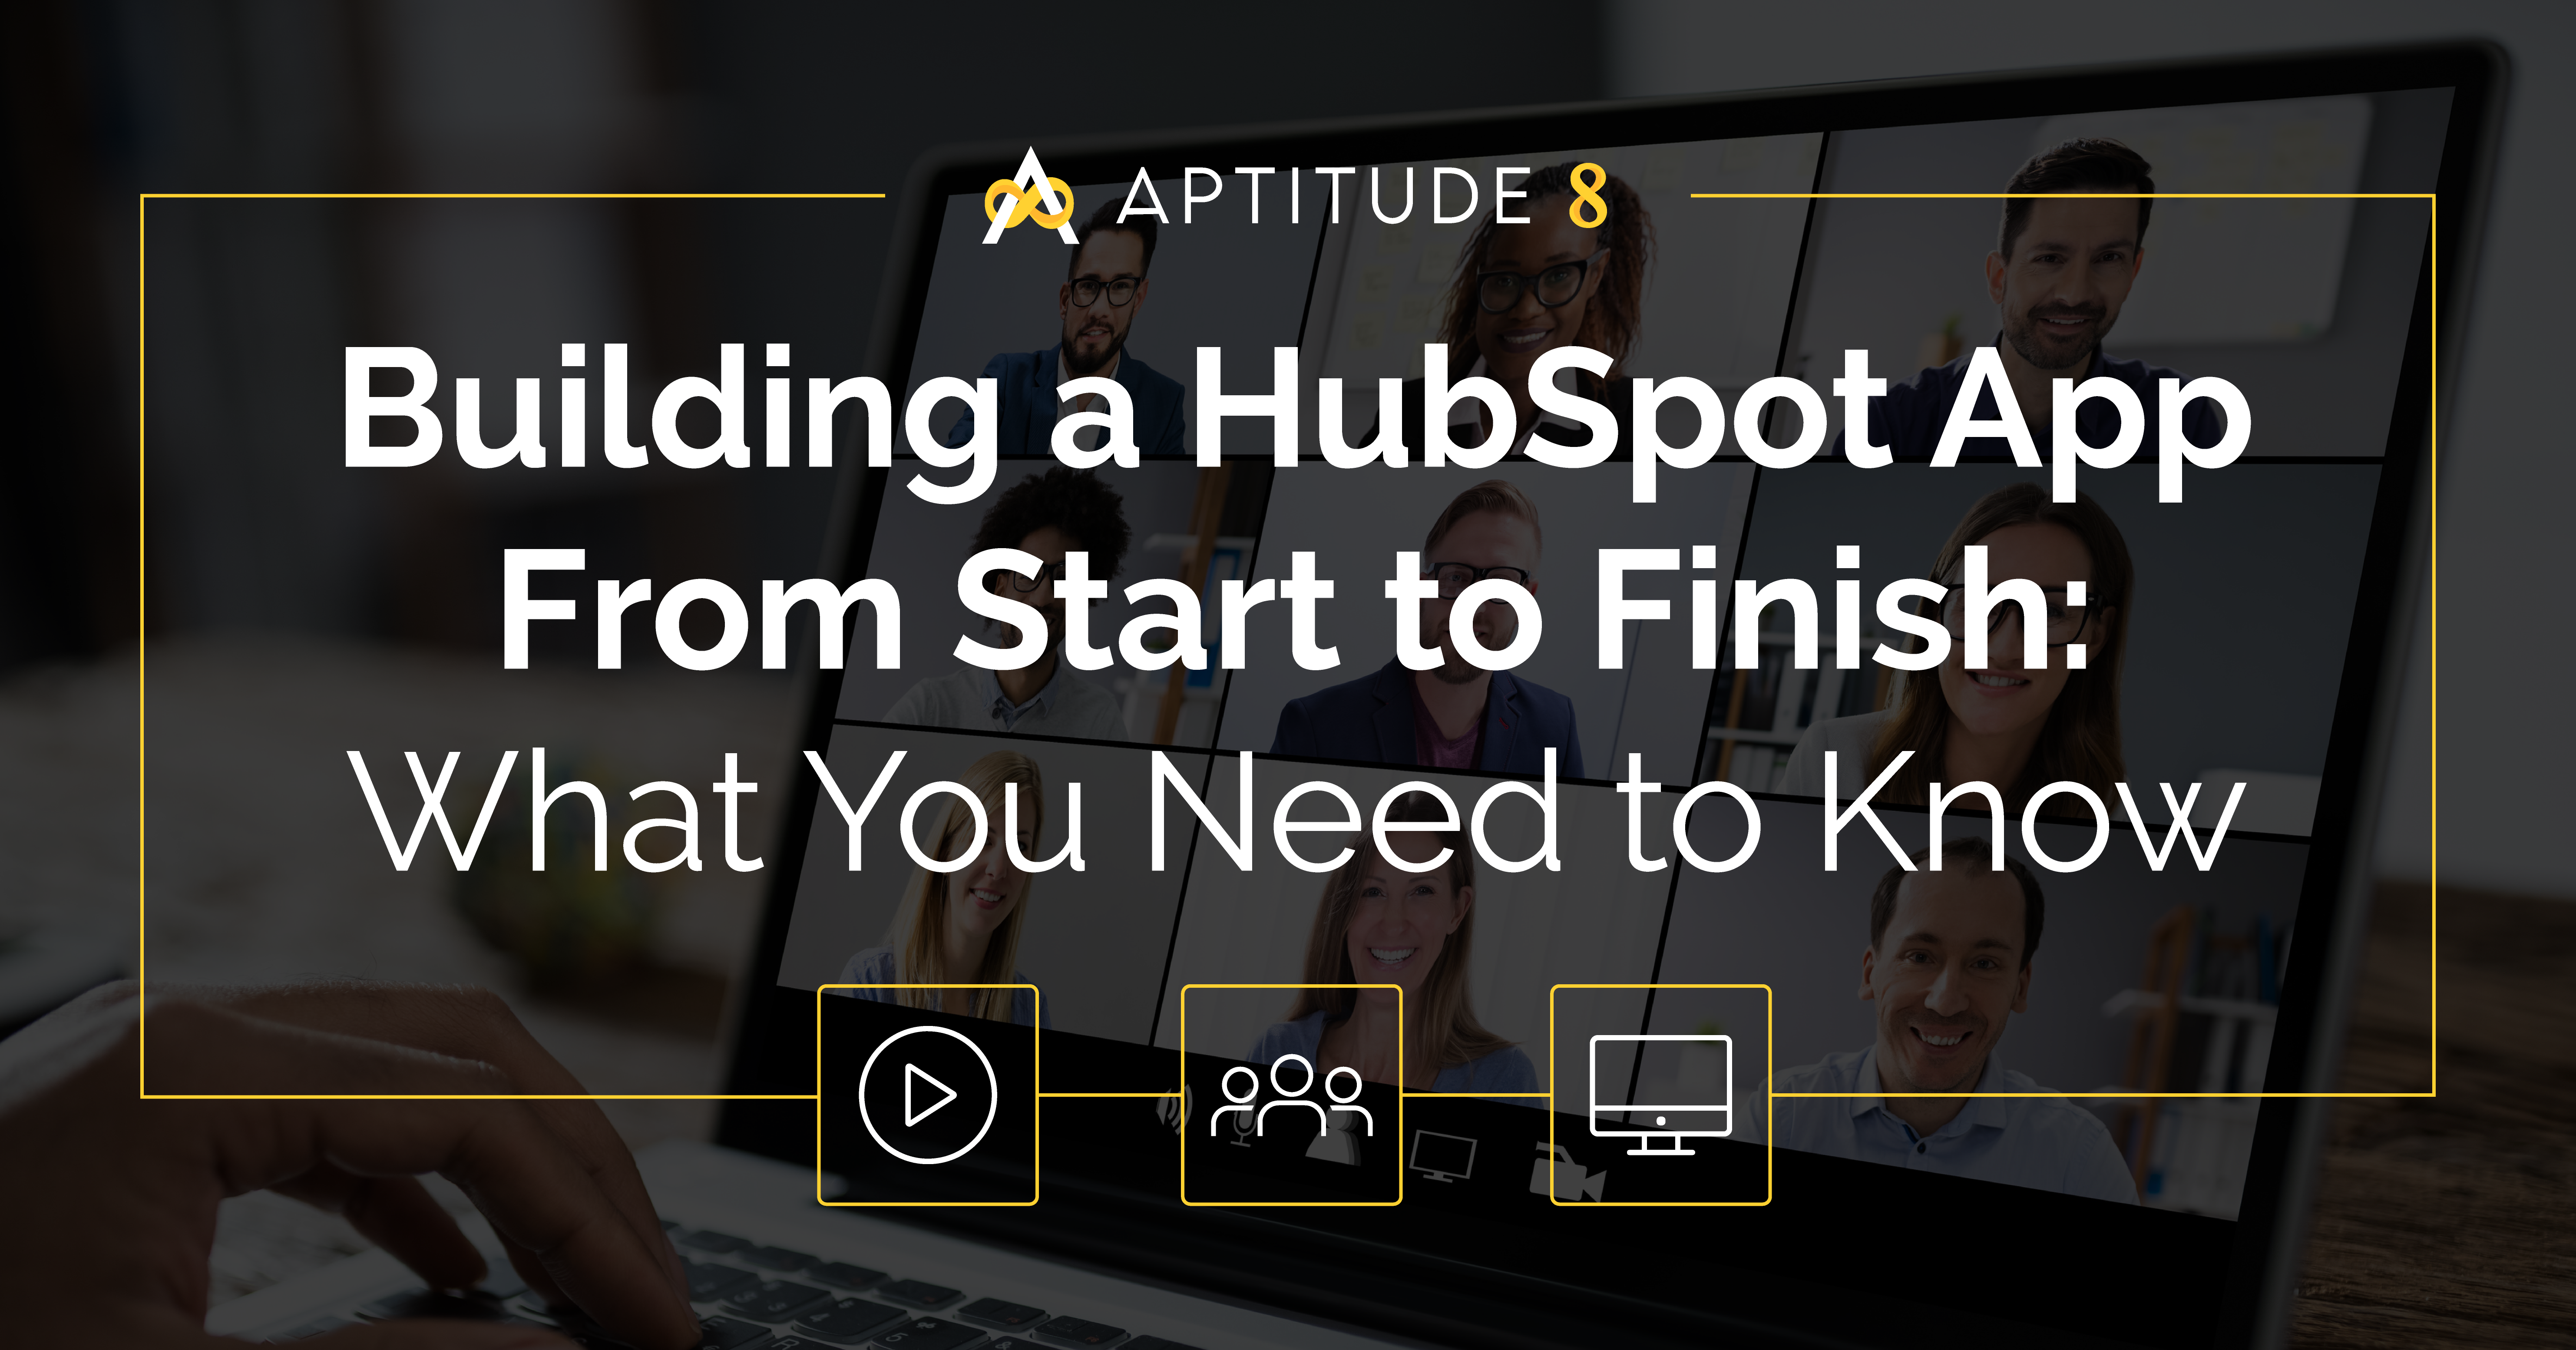 Building A HubSpot App From Start to Finish - Session 1